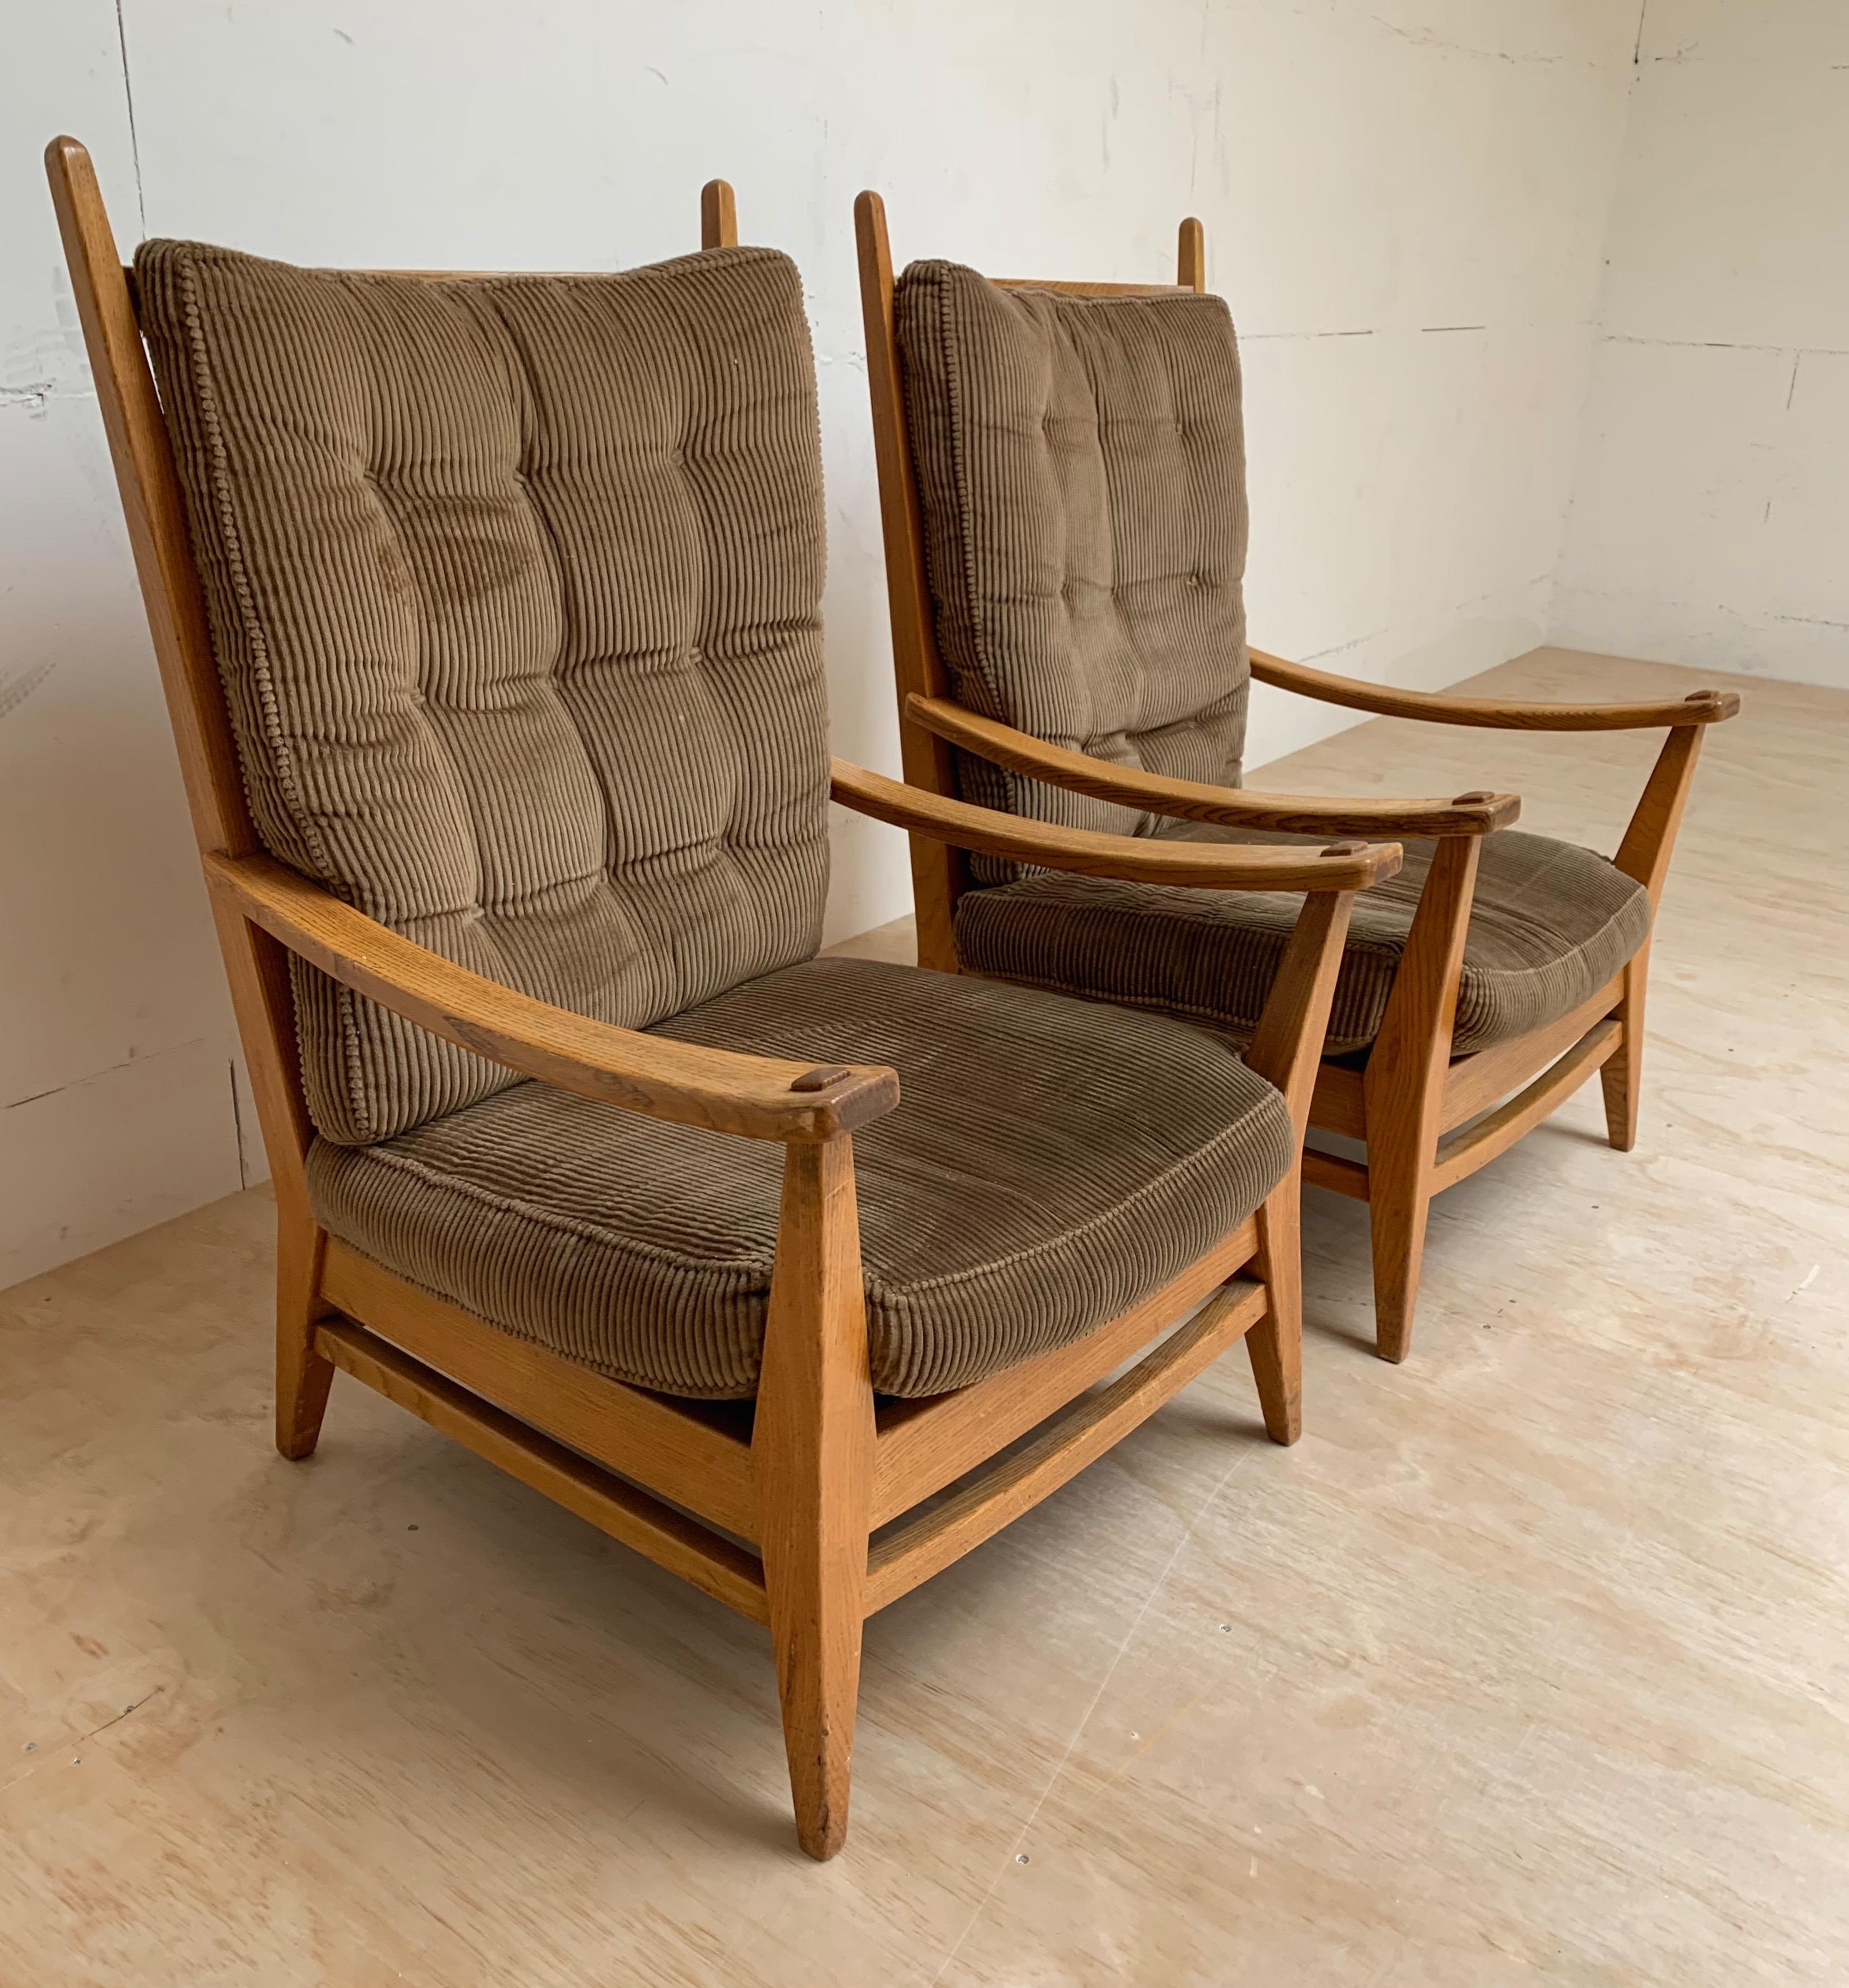 1930 chairs